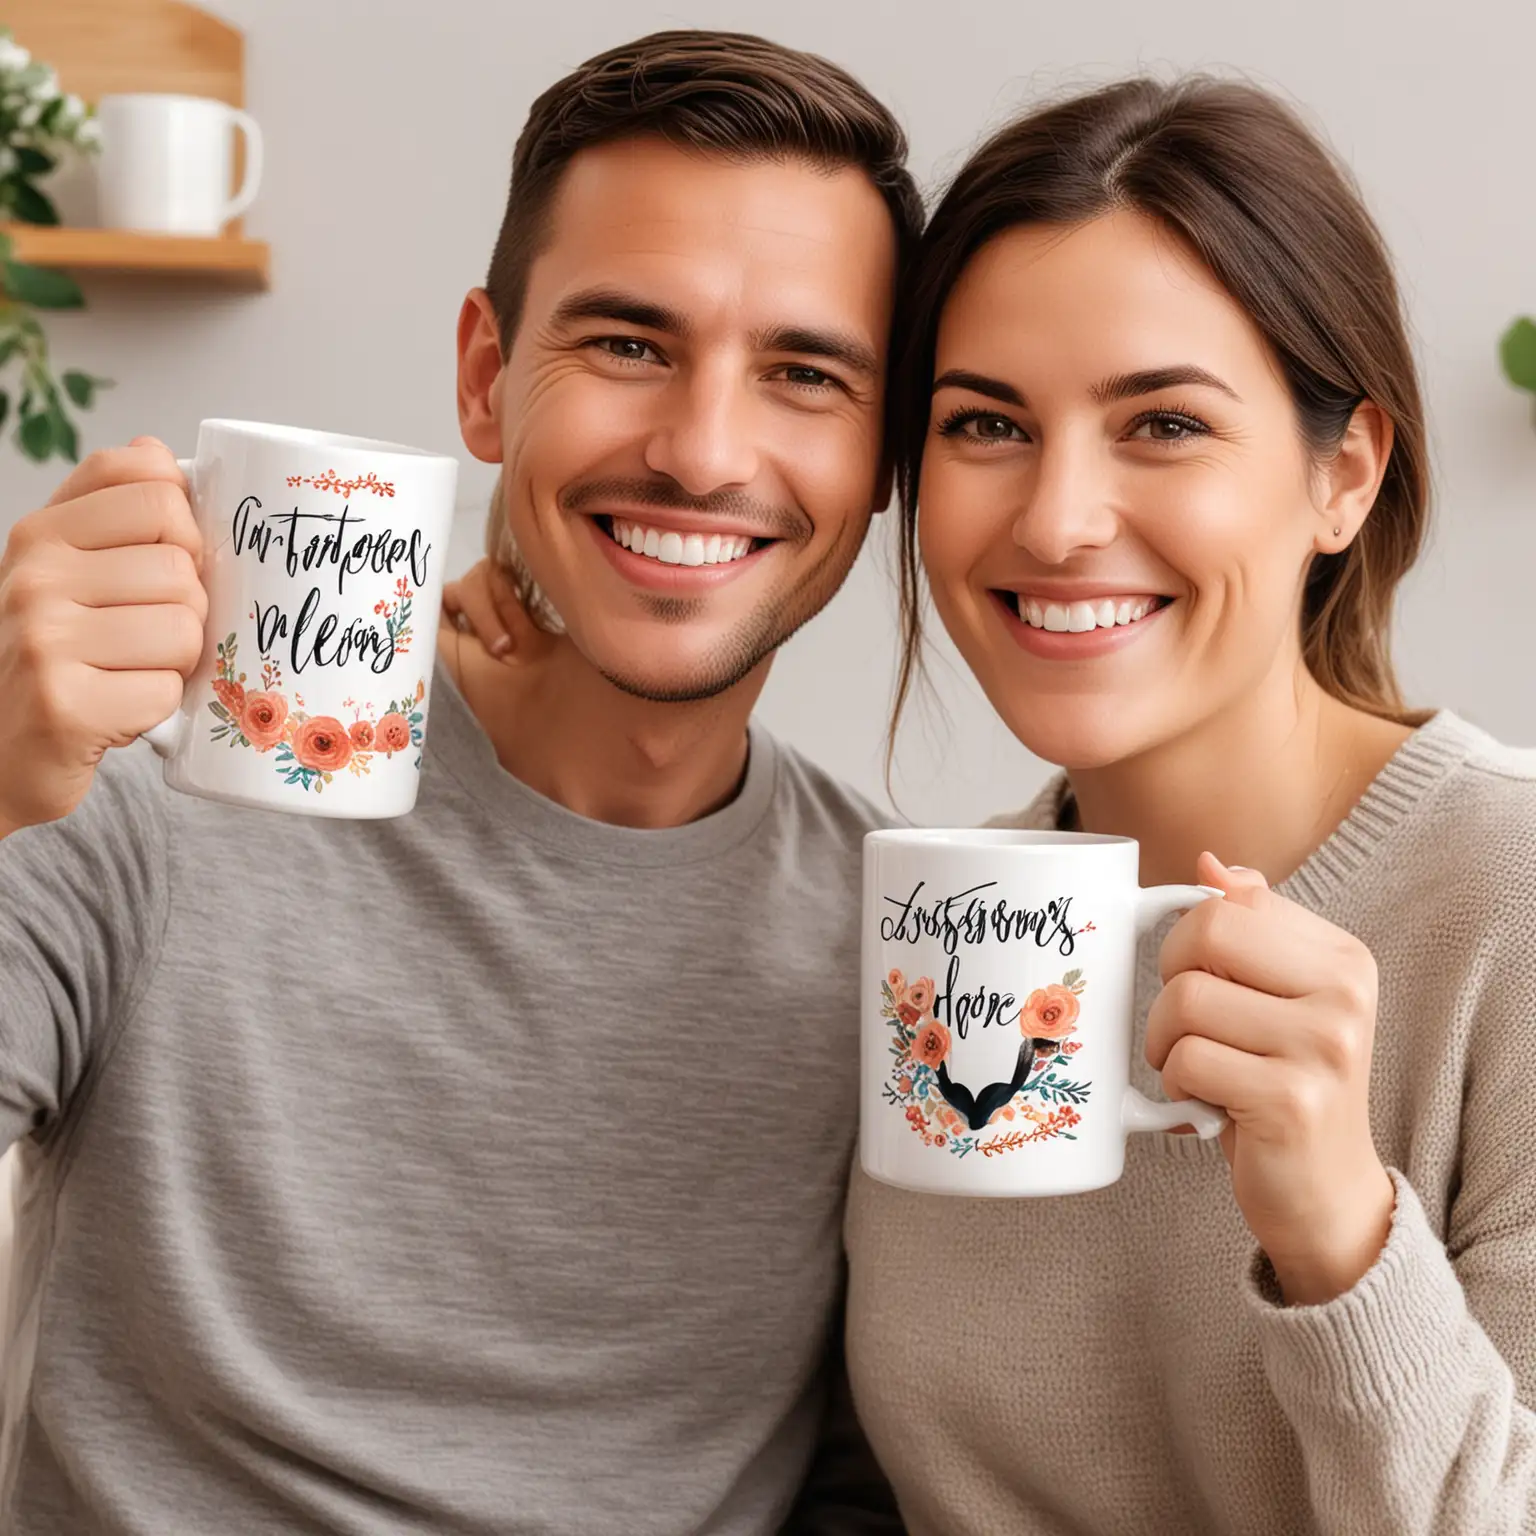 Smiling Couple with Customized Coffee Mugs